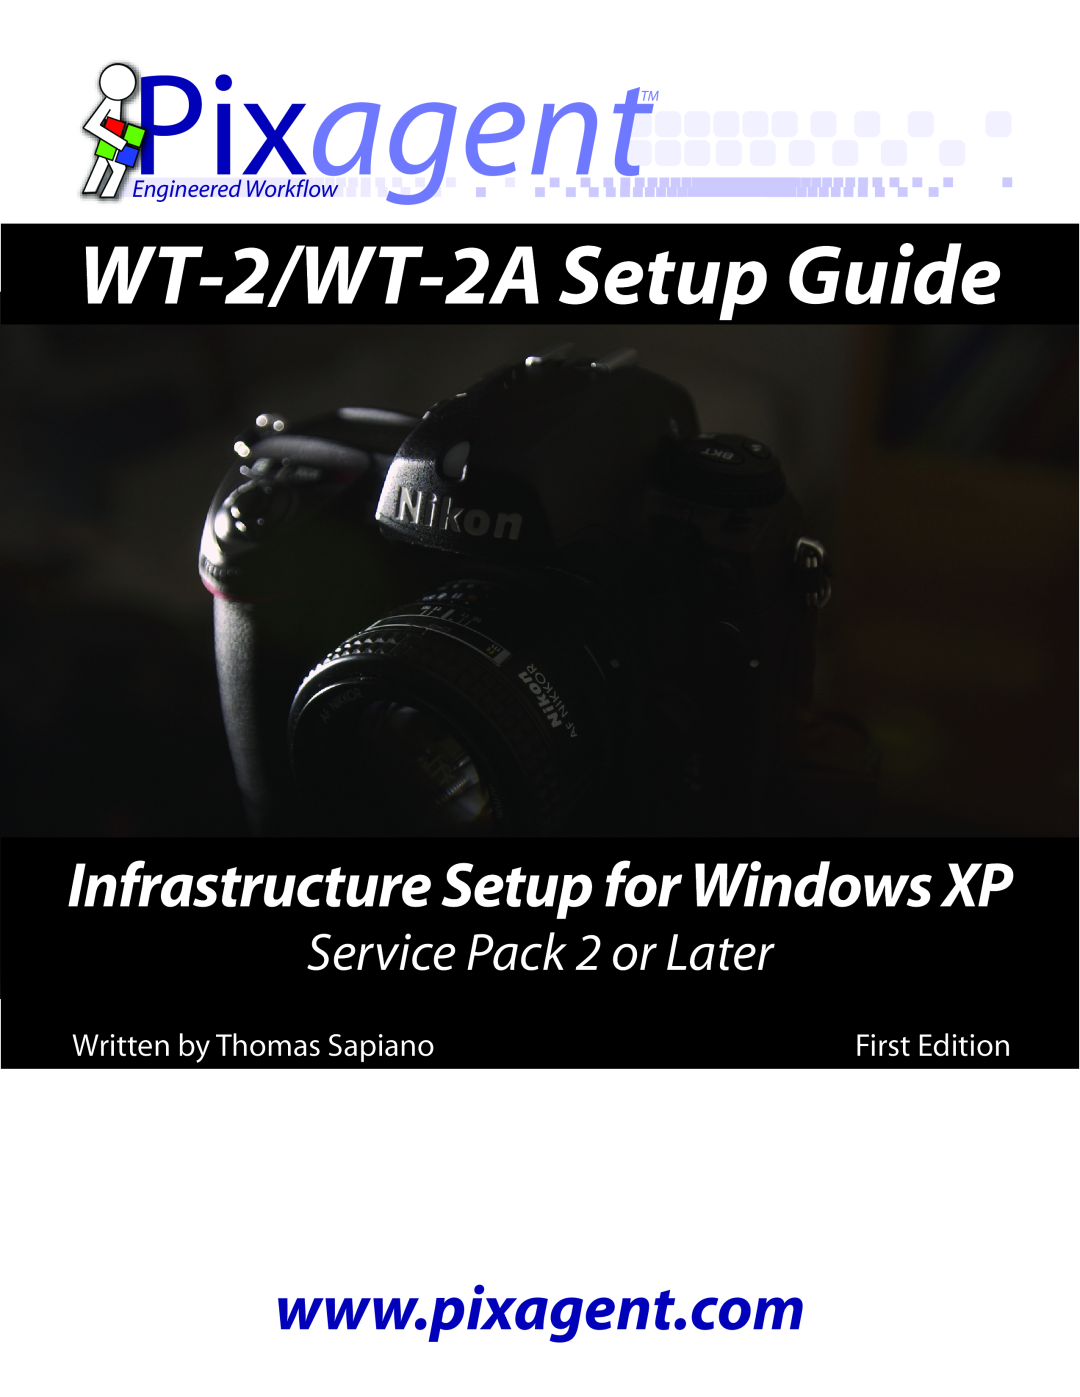 Nikon setup guide Written by Thomas Sapiano, First Edition, PixagentTM, WT-2/WT-2A Setup Guide, Service Pack 2 or Later 